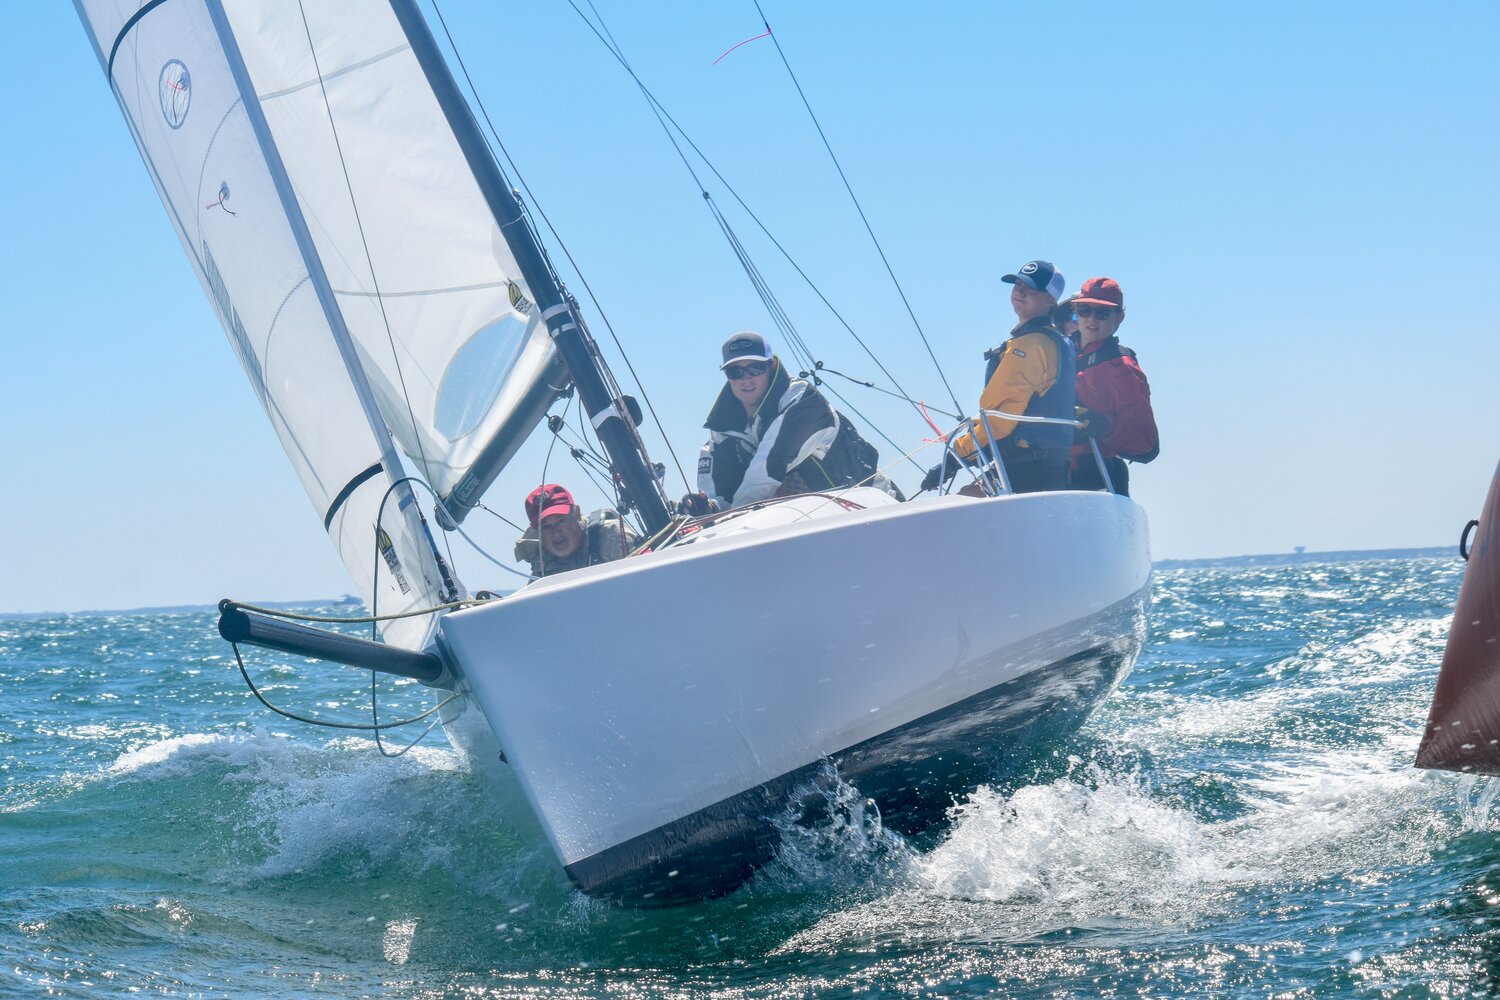 The Nantucket Regatta was held Saturday after day one of racing was postponed due to weather Friday.